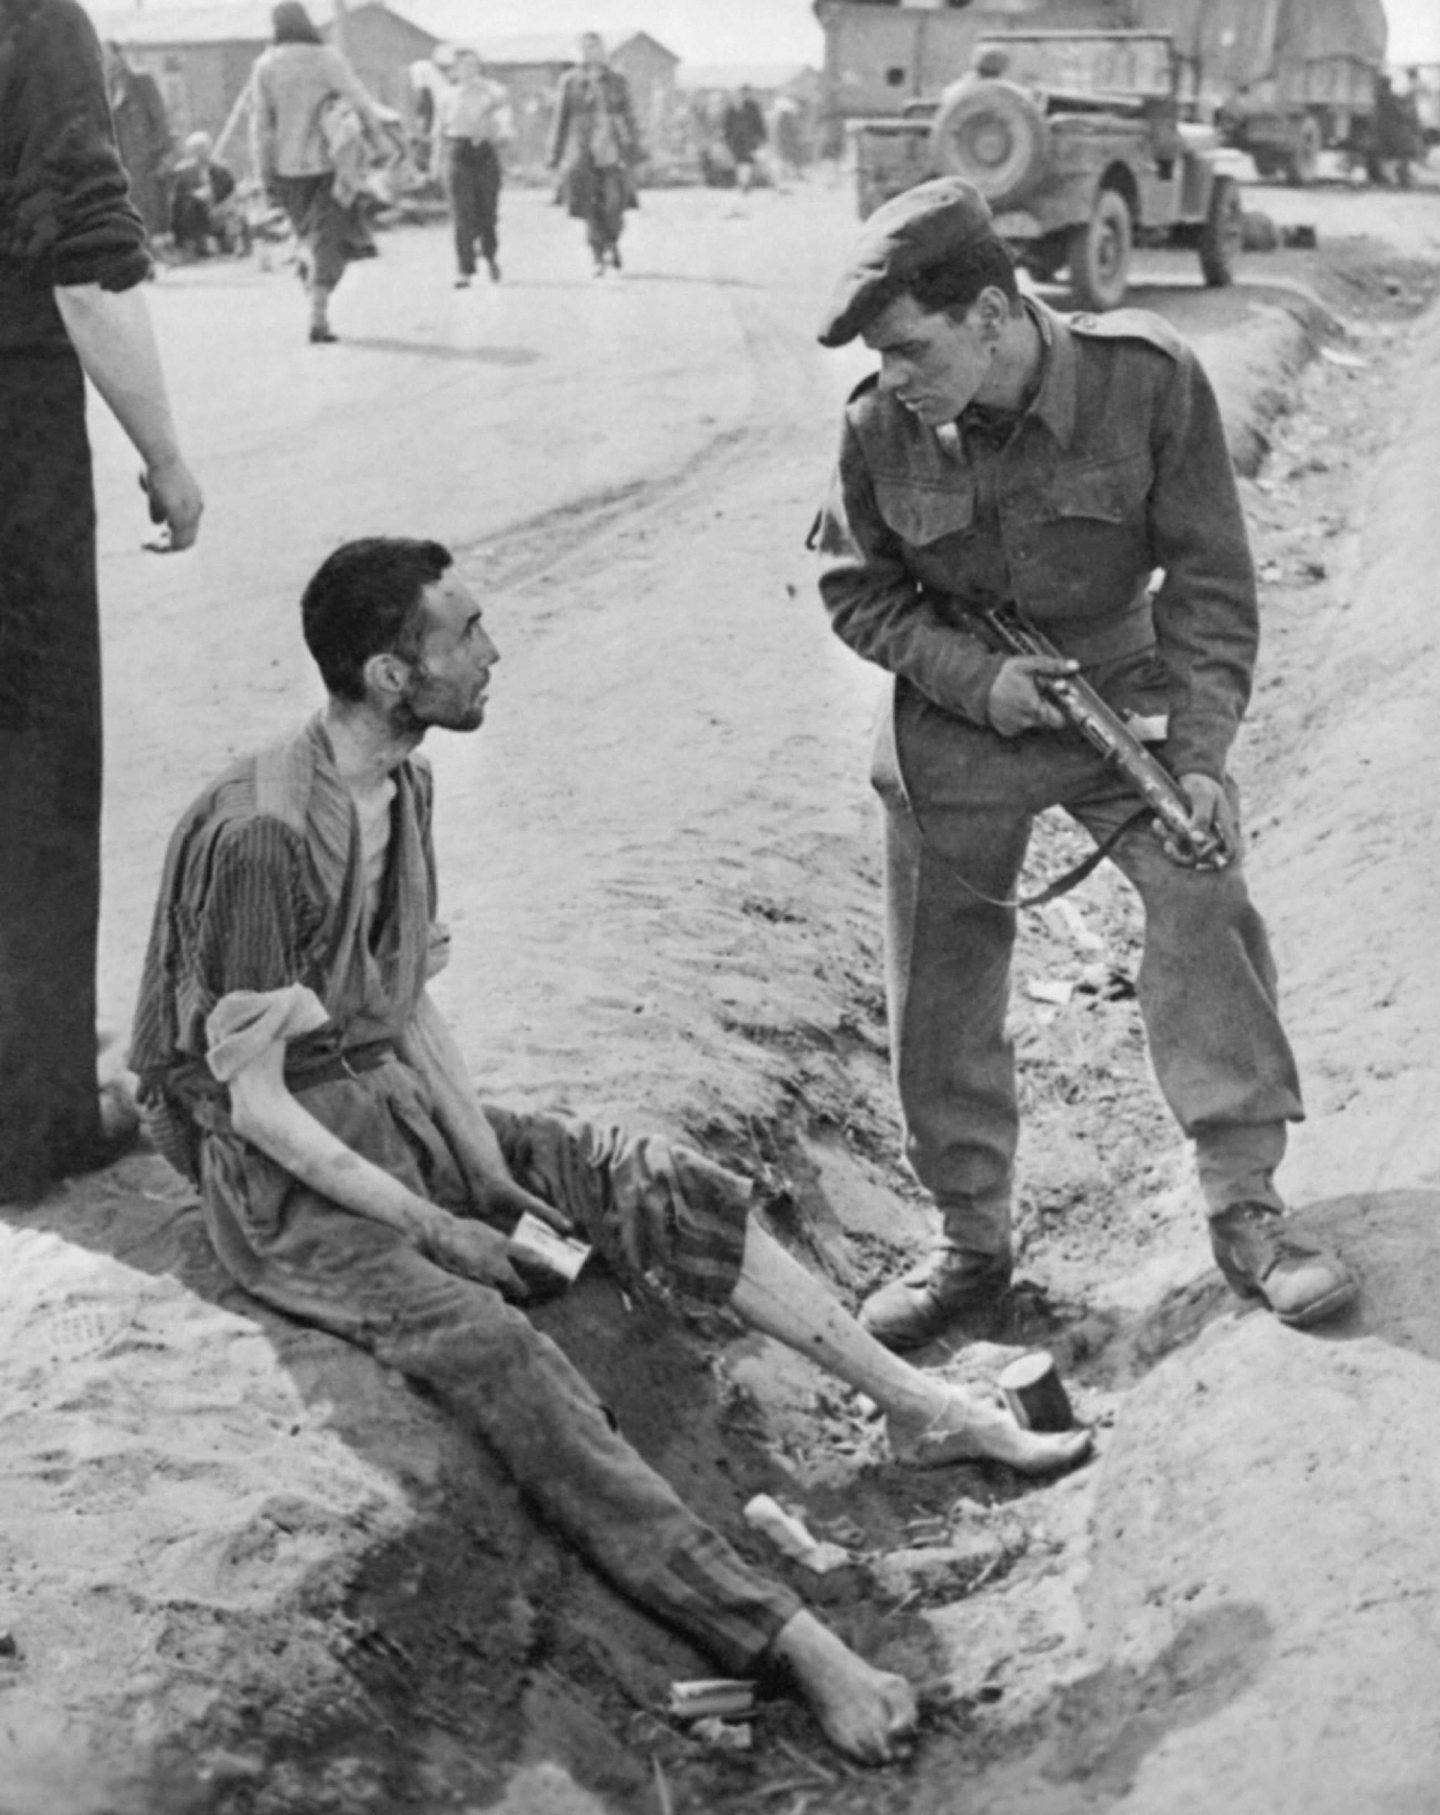 A British soldier talking to an inmate at Belsen.